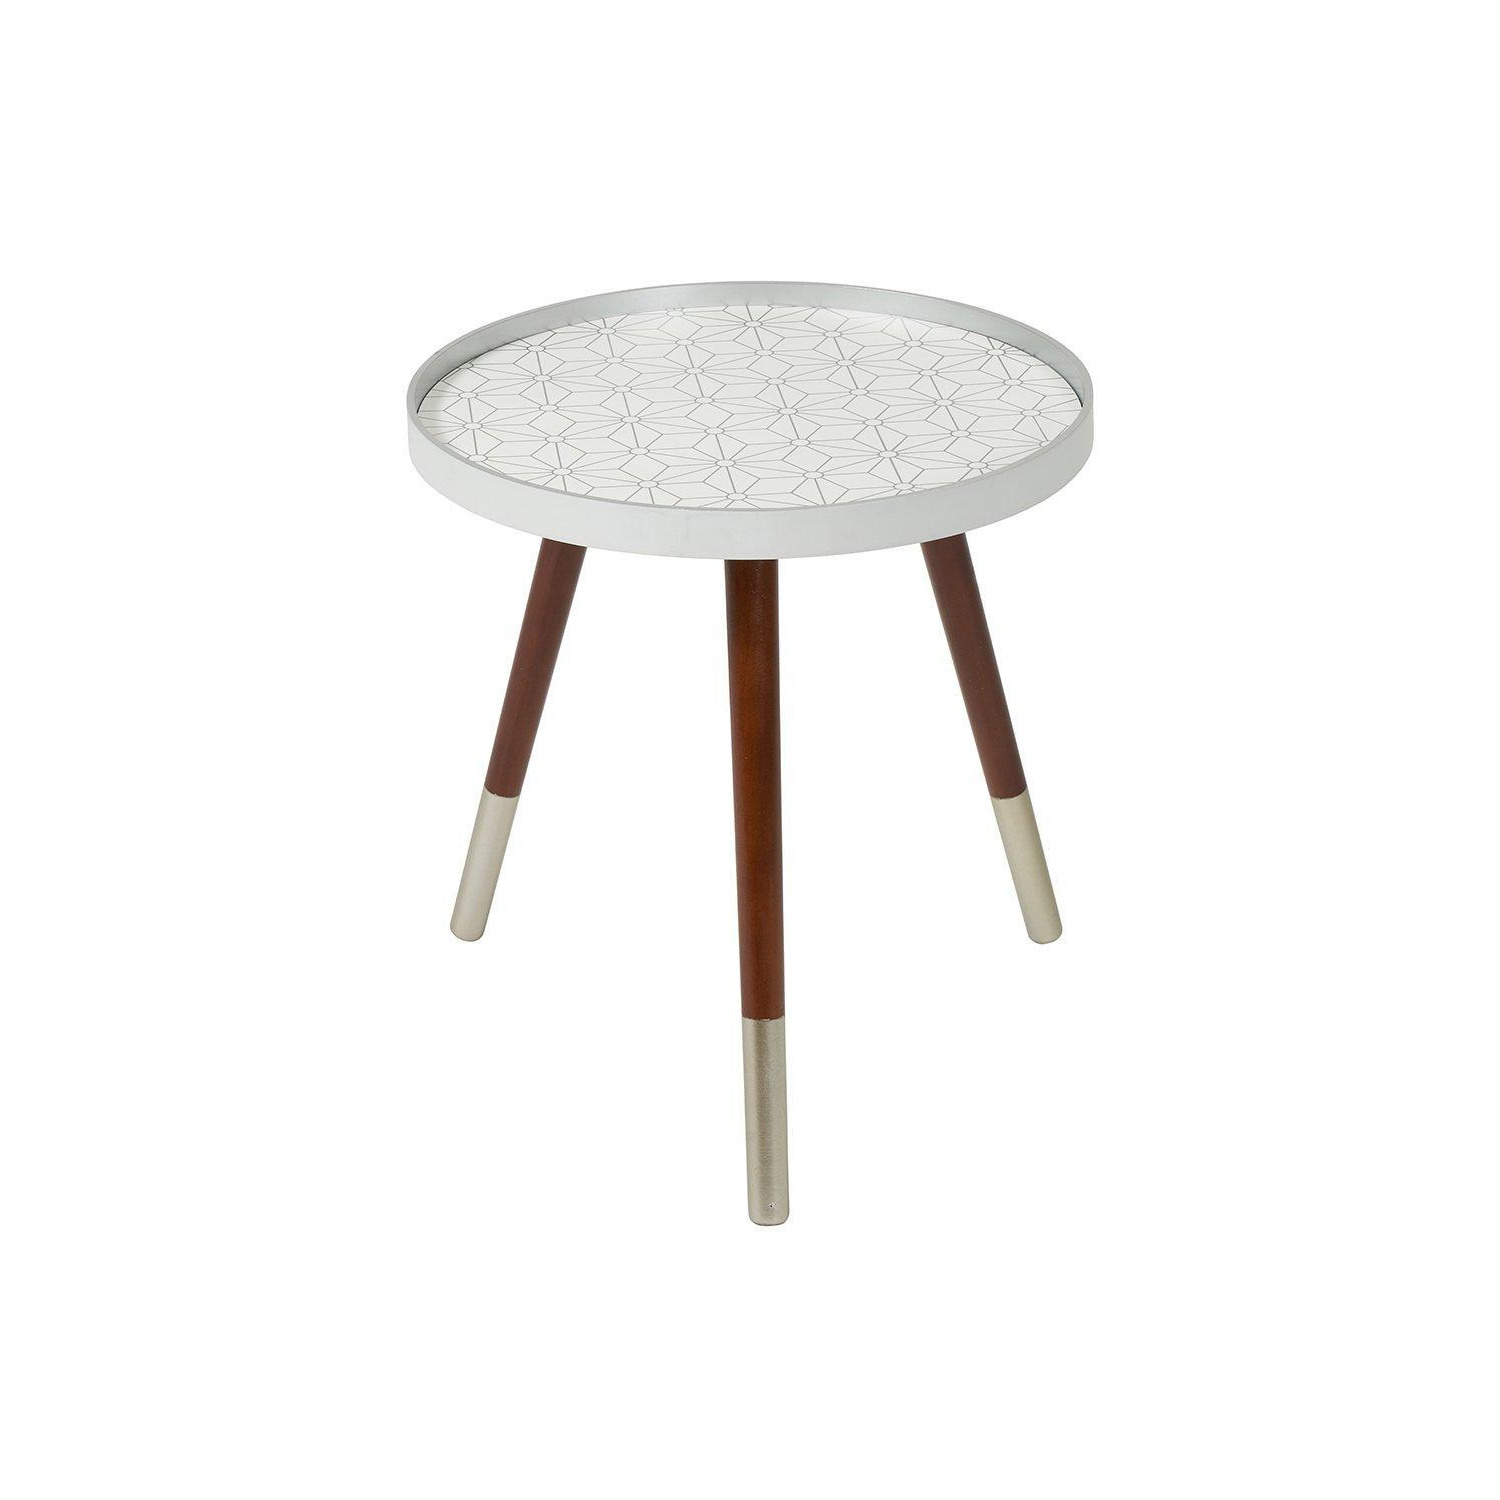 Sabina White & Silver Geo Floral Lipped Top Pine Wood Silver Dipped Leg Side Table - image 1